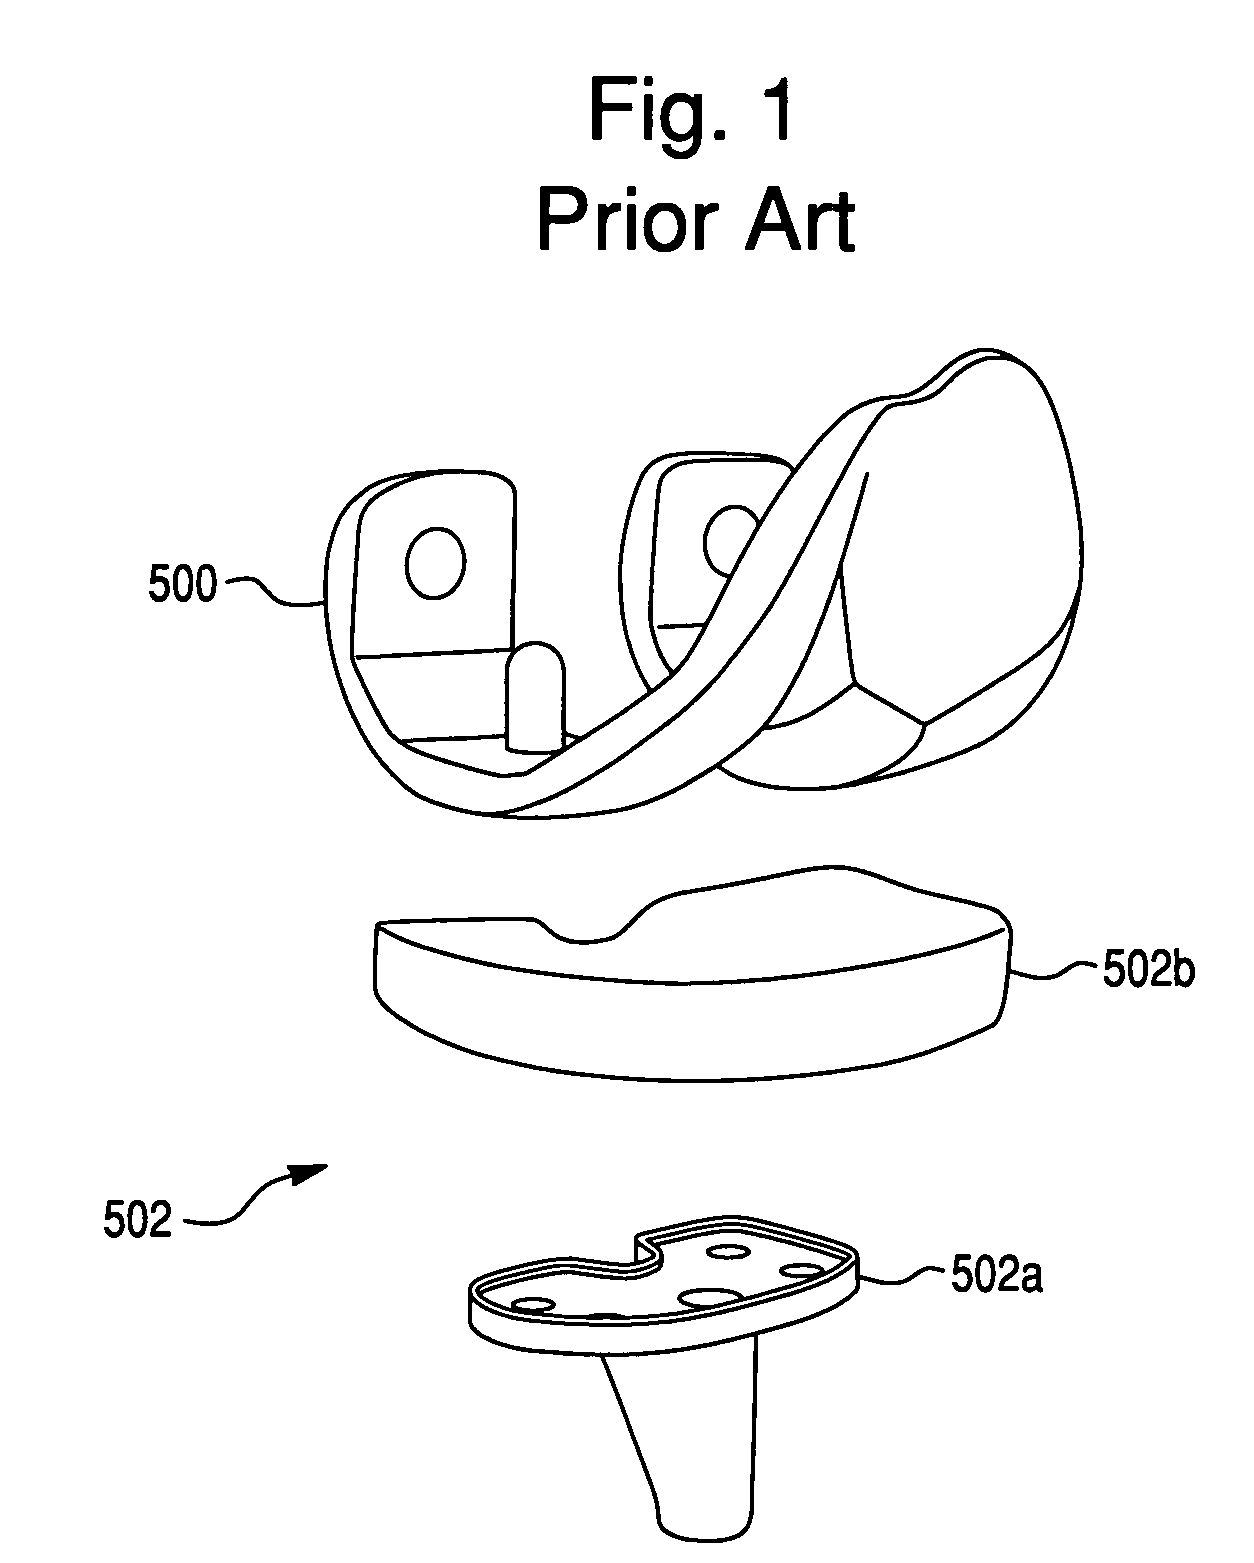 Multi-compartmental prosthetic device with patellar component transition